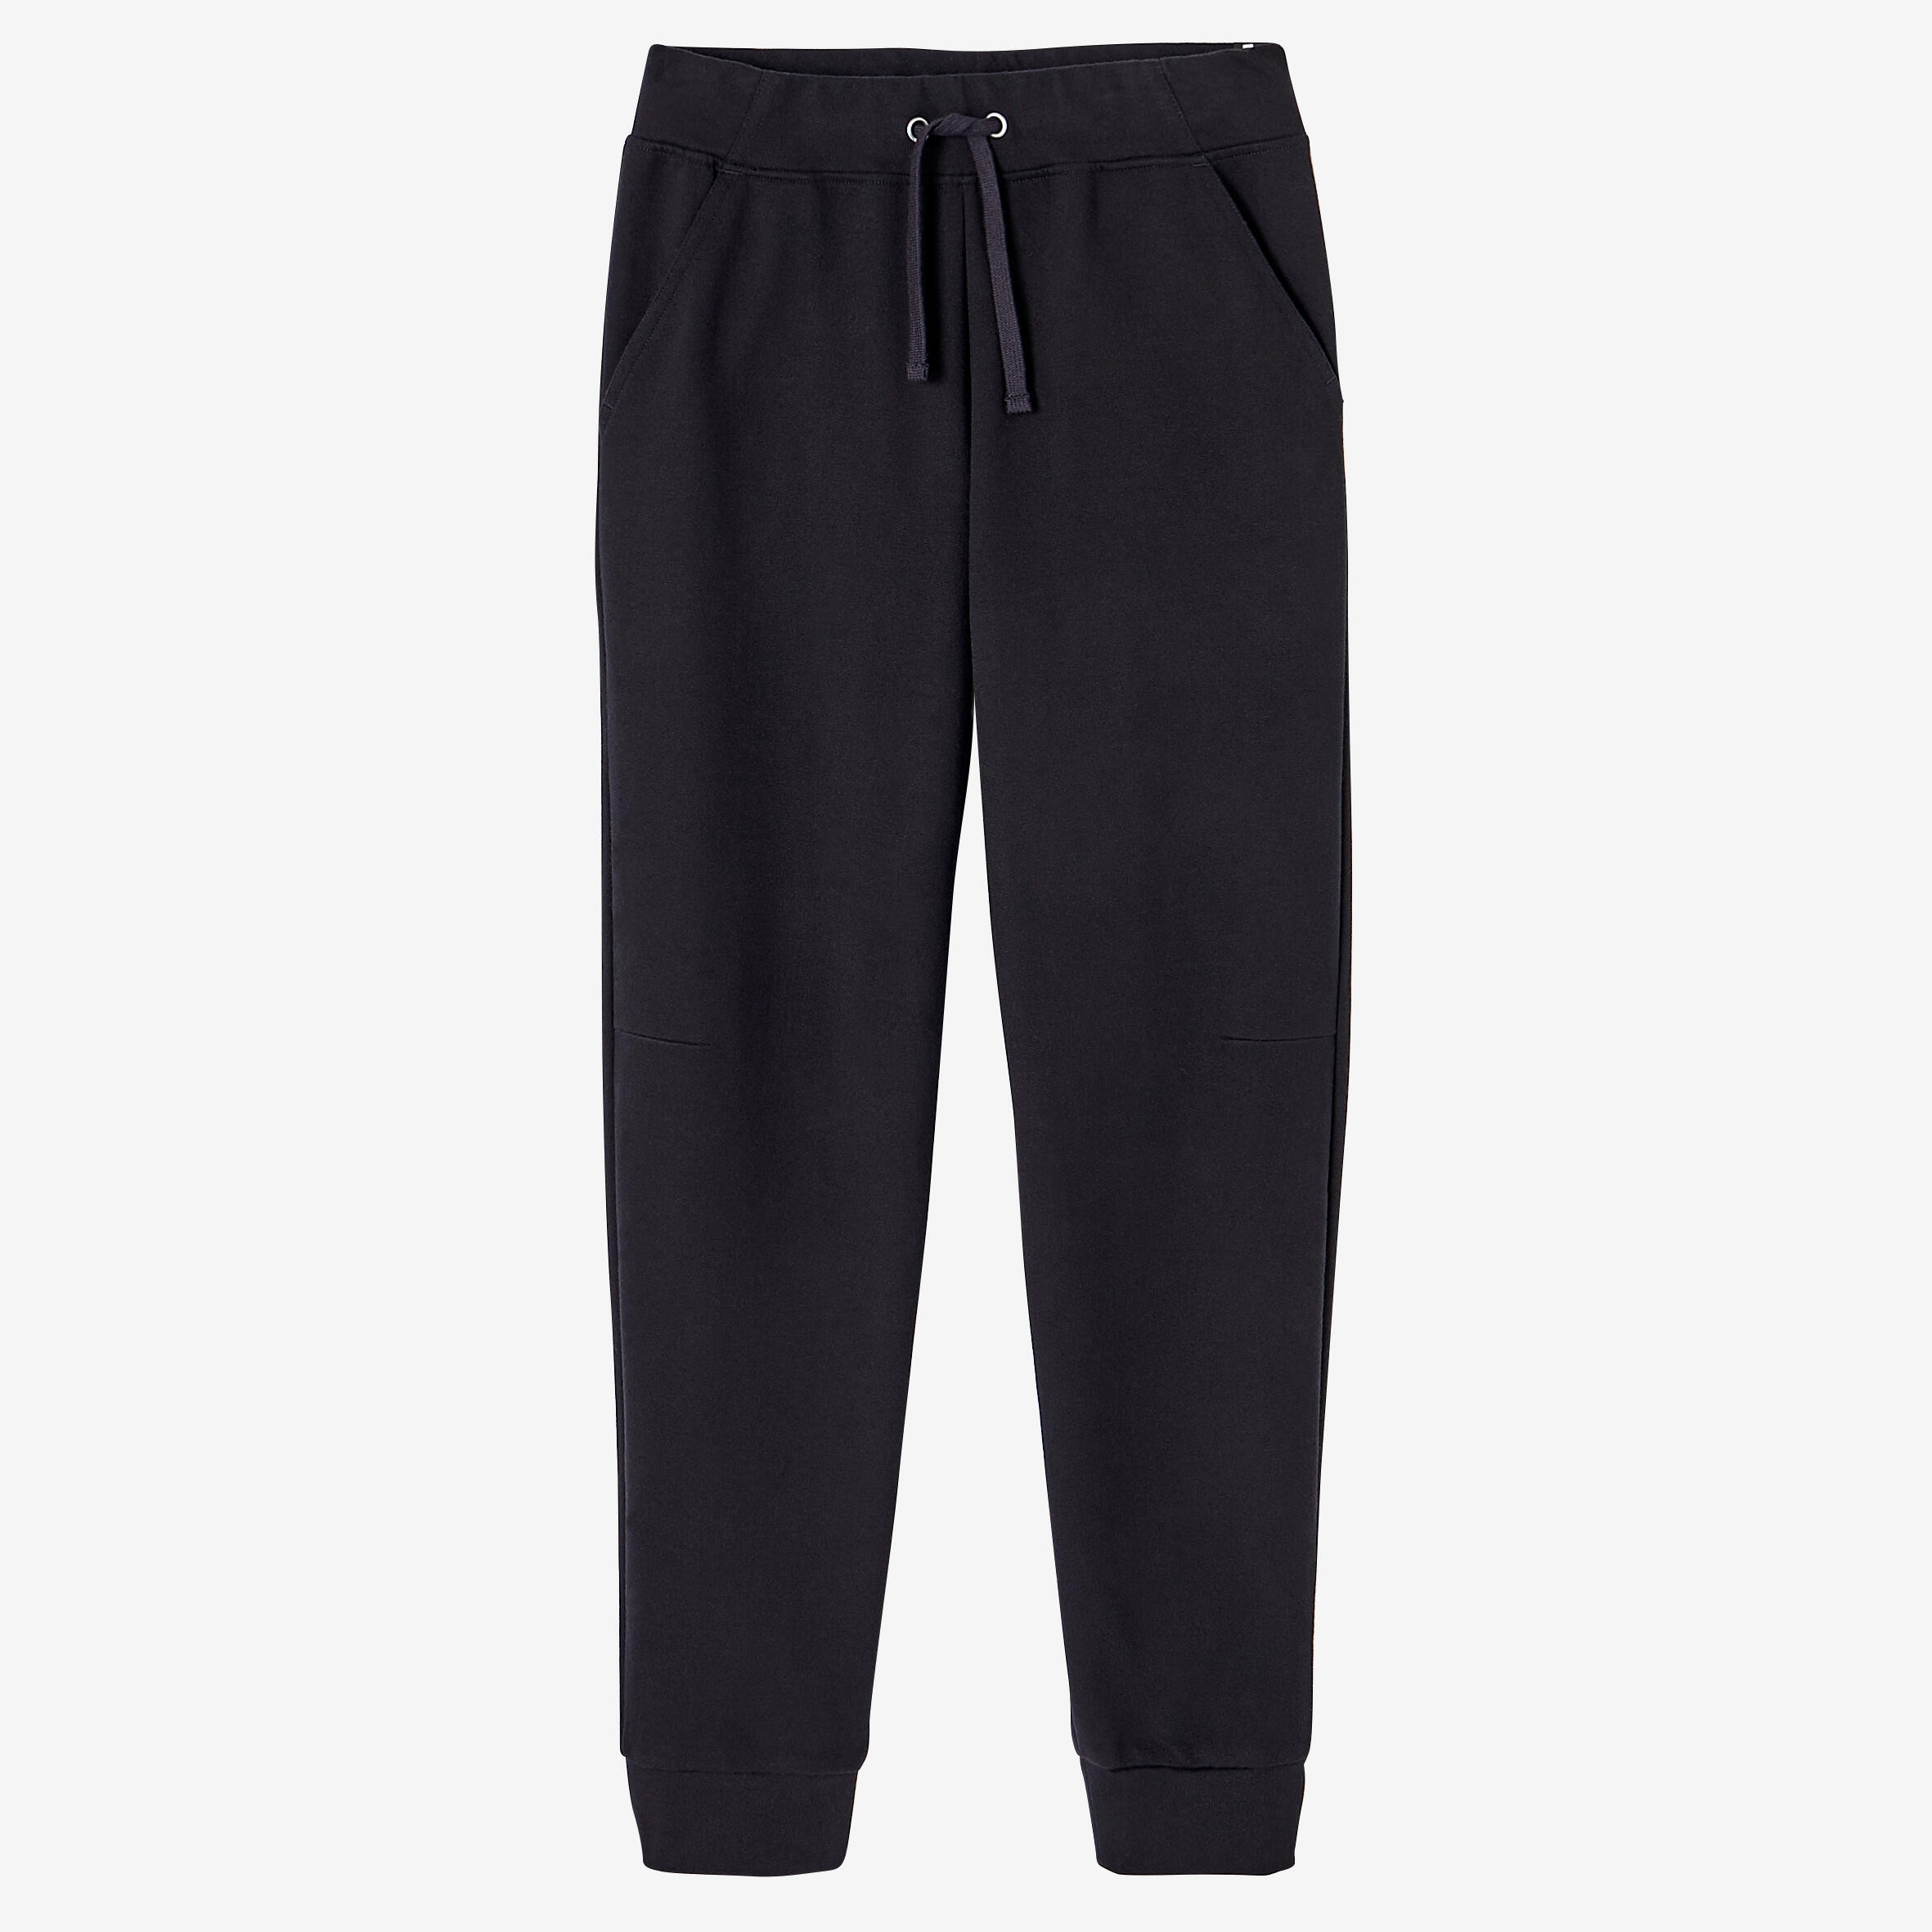 Women's Straight-Cut Cotton Jogging Fitness Bottoms With Pocket 500 - Black 5/5